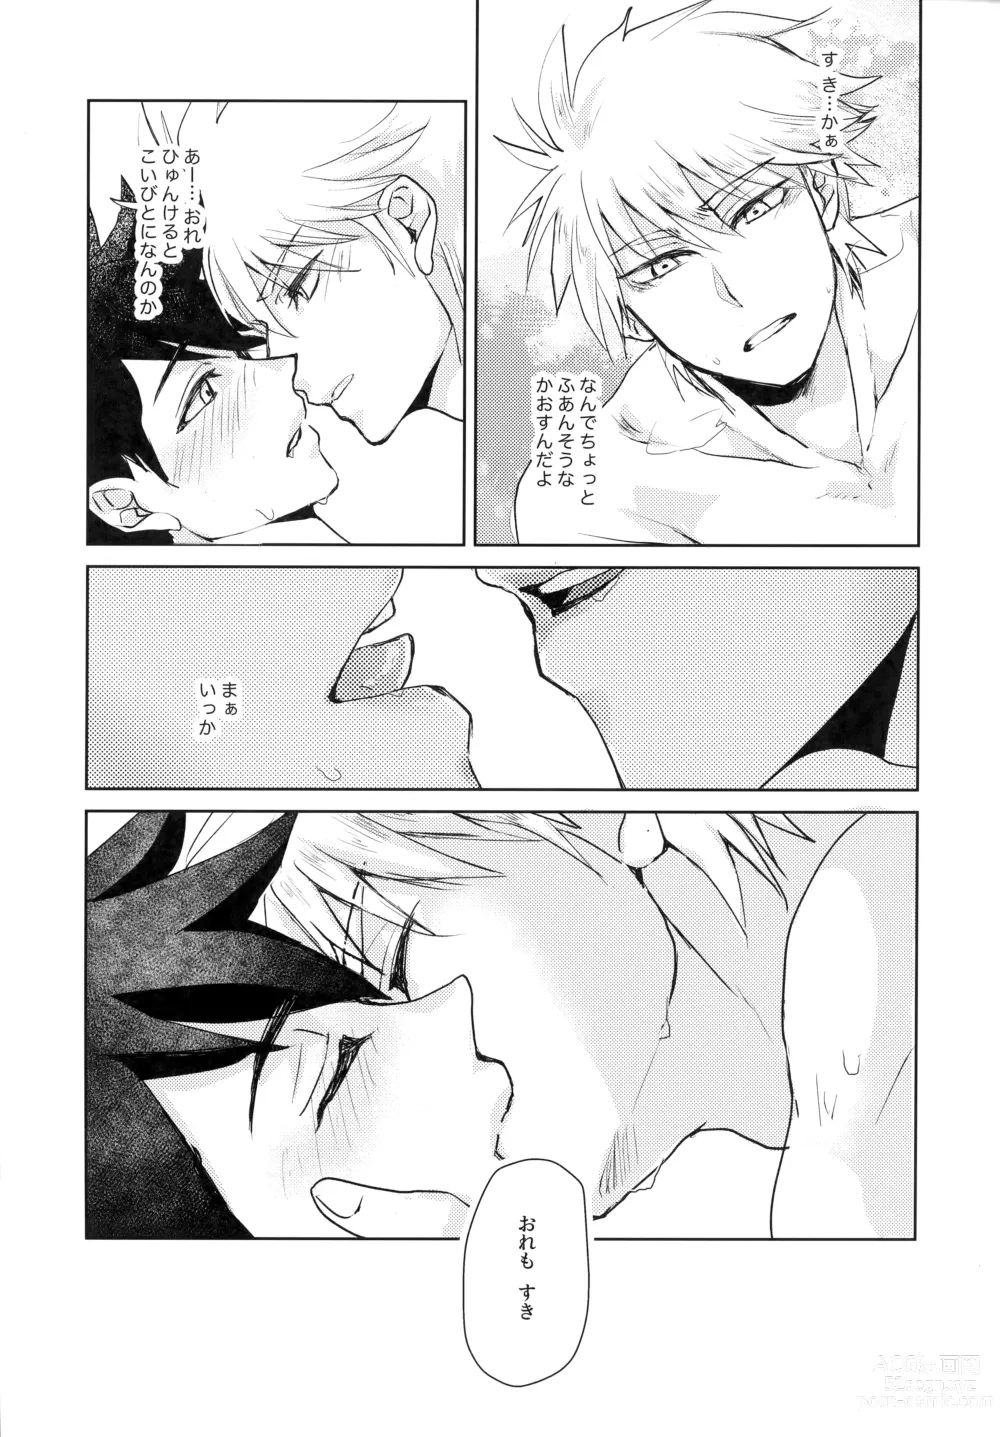 Page 20 of doujinshi You Complete Me!